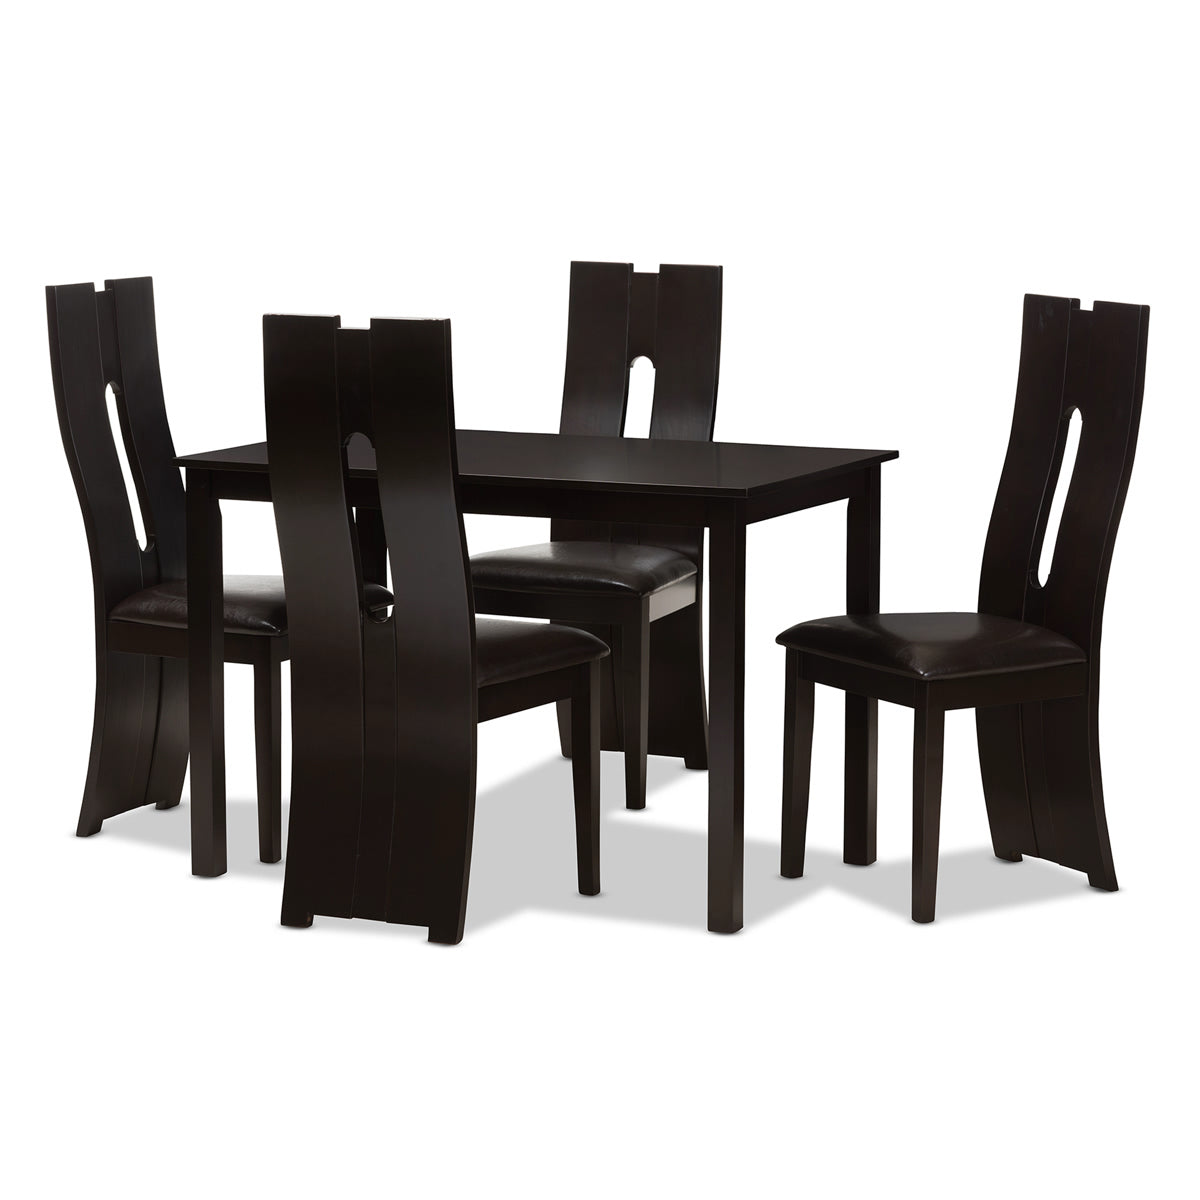 Baxton Studio Alani Modern and Contemporary Dark Brown Faux Leather Upholstered 5-Piece Dining Set Baxton Studio-0-Minimal And Modern - 1